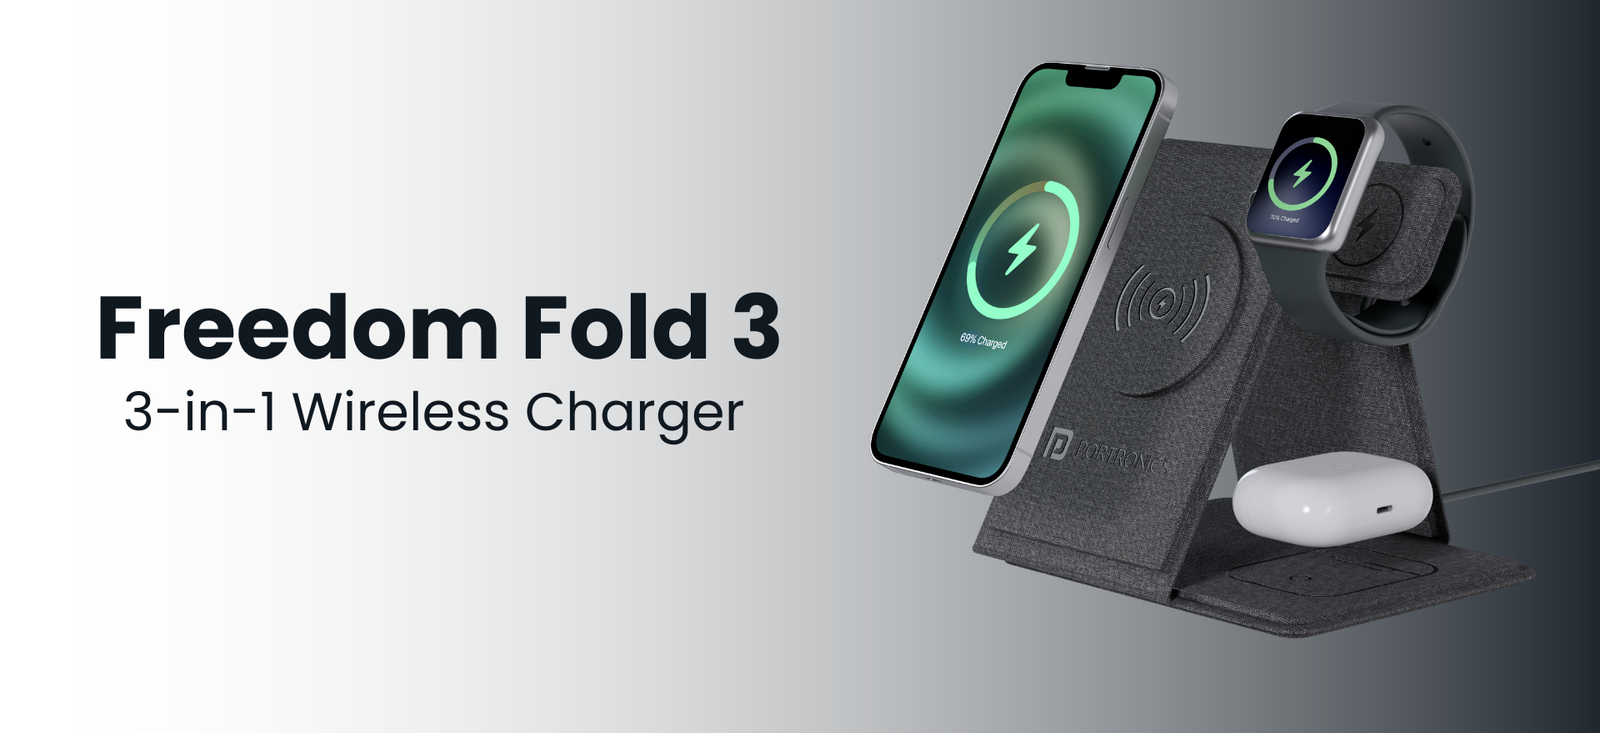 Portronics Freedom Fold 3 - Wireless Charger